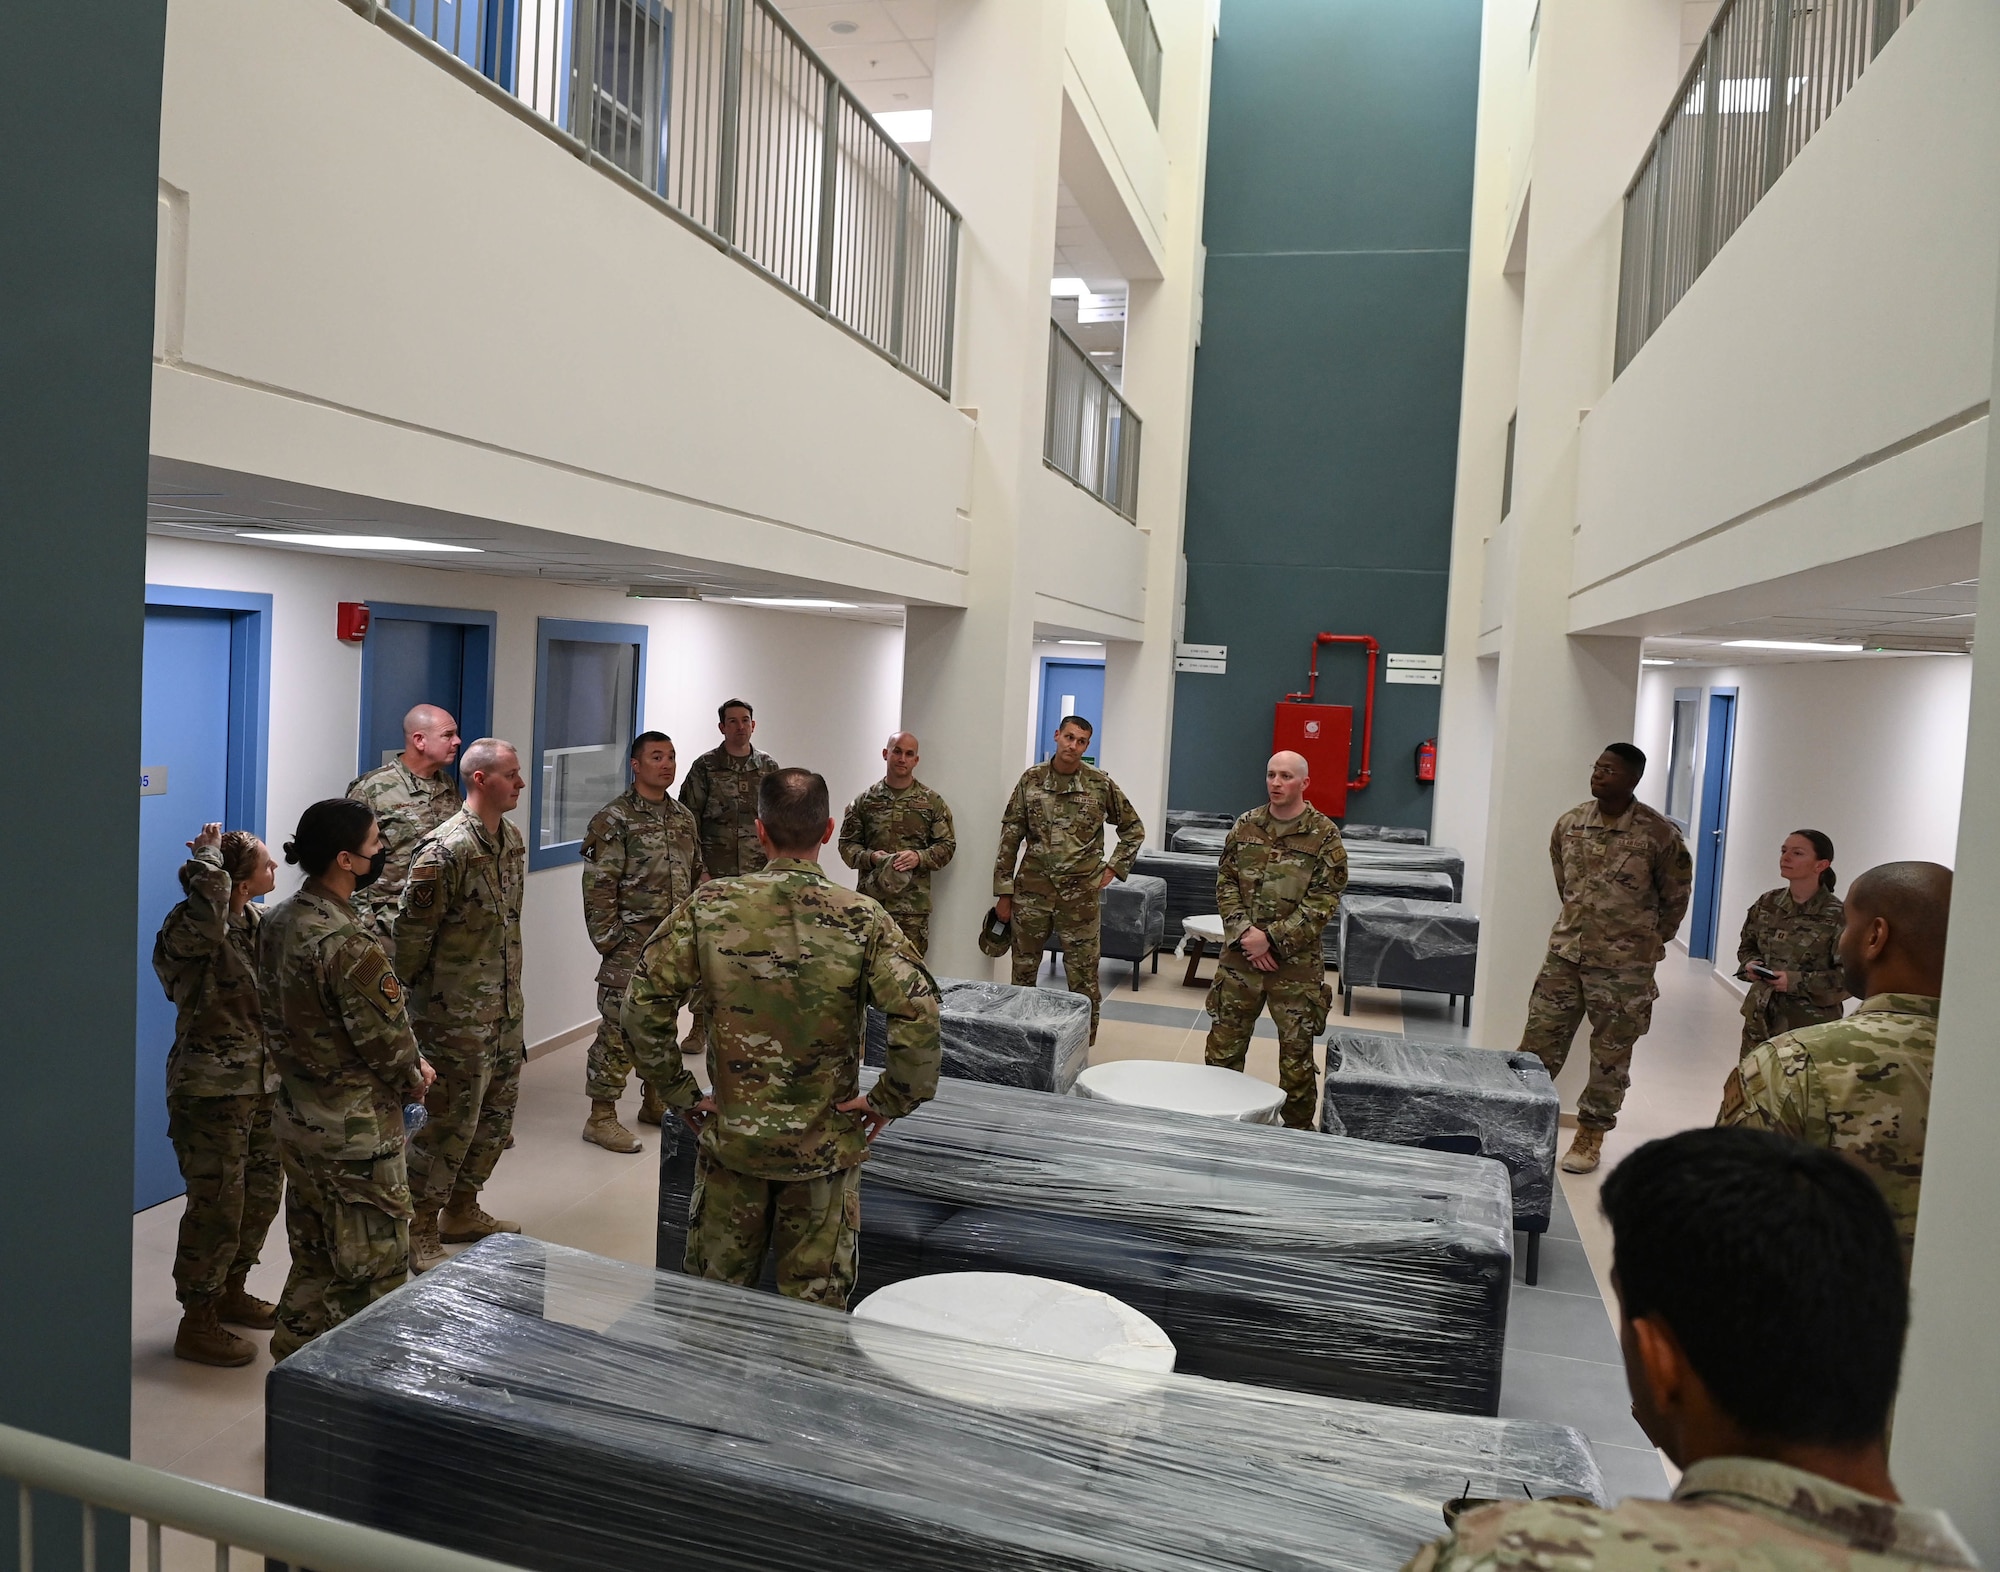 379th Air Expeditionary Wing leadership tour the interior of a newly finished dormitory July 2, 2022 at Al Udeid Air Base, Qatar. The new dorms are a part of a multi-year development project to replace aging infrastructure and improve both quality of life and safety for base tenants. (U.S. Air National Guard photo by Tech. Sgt. Michael J. Kelly)